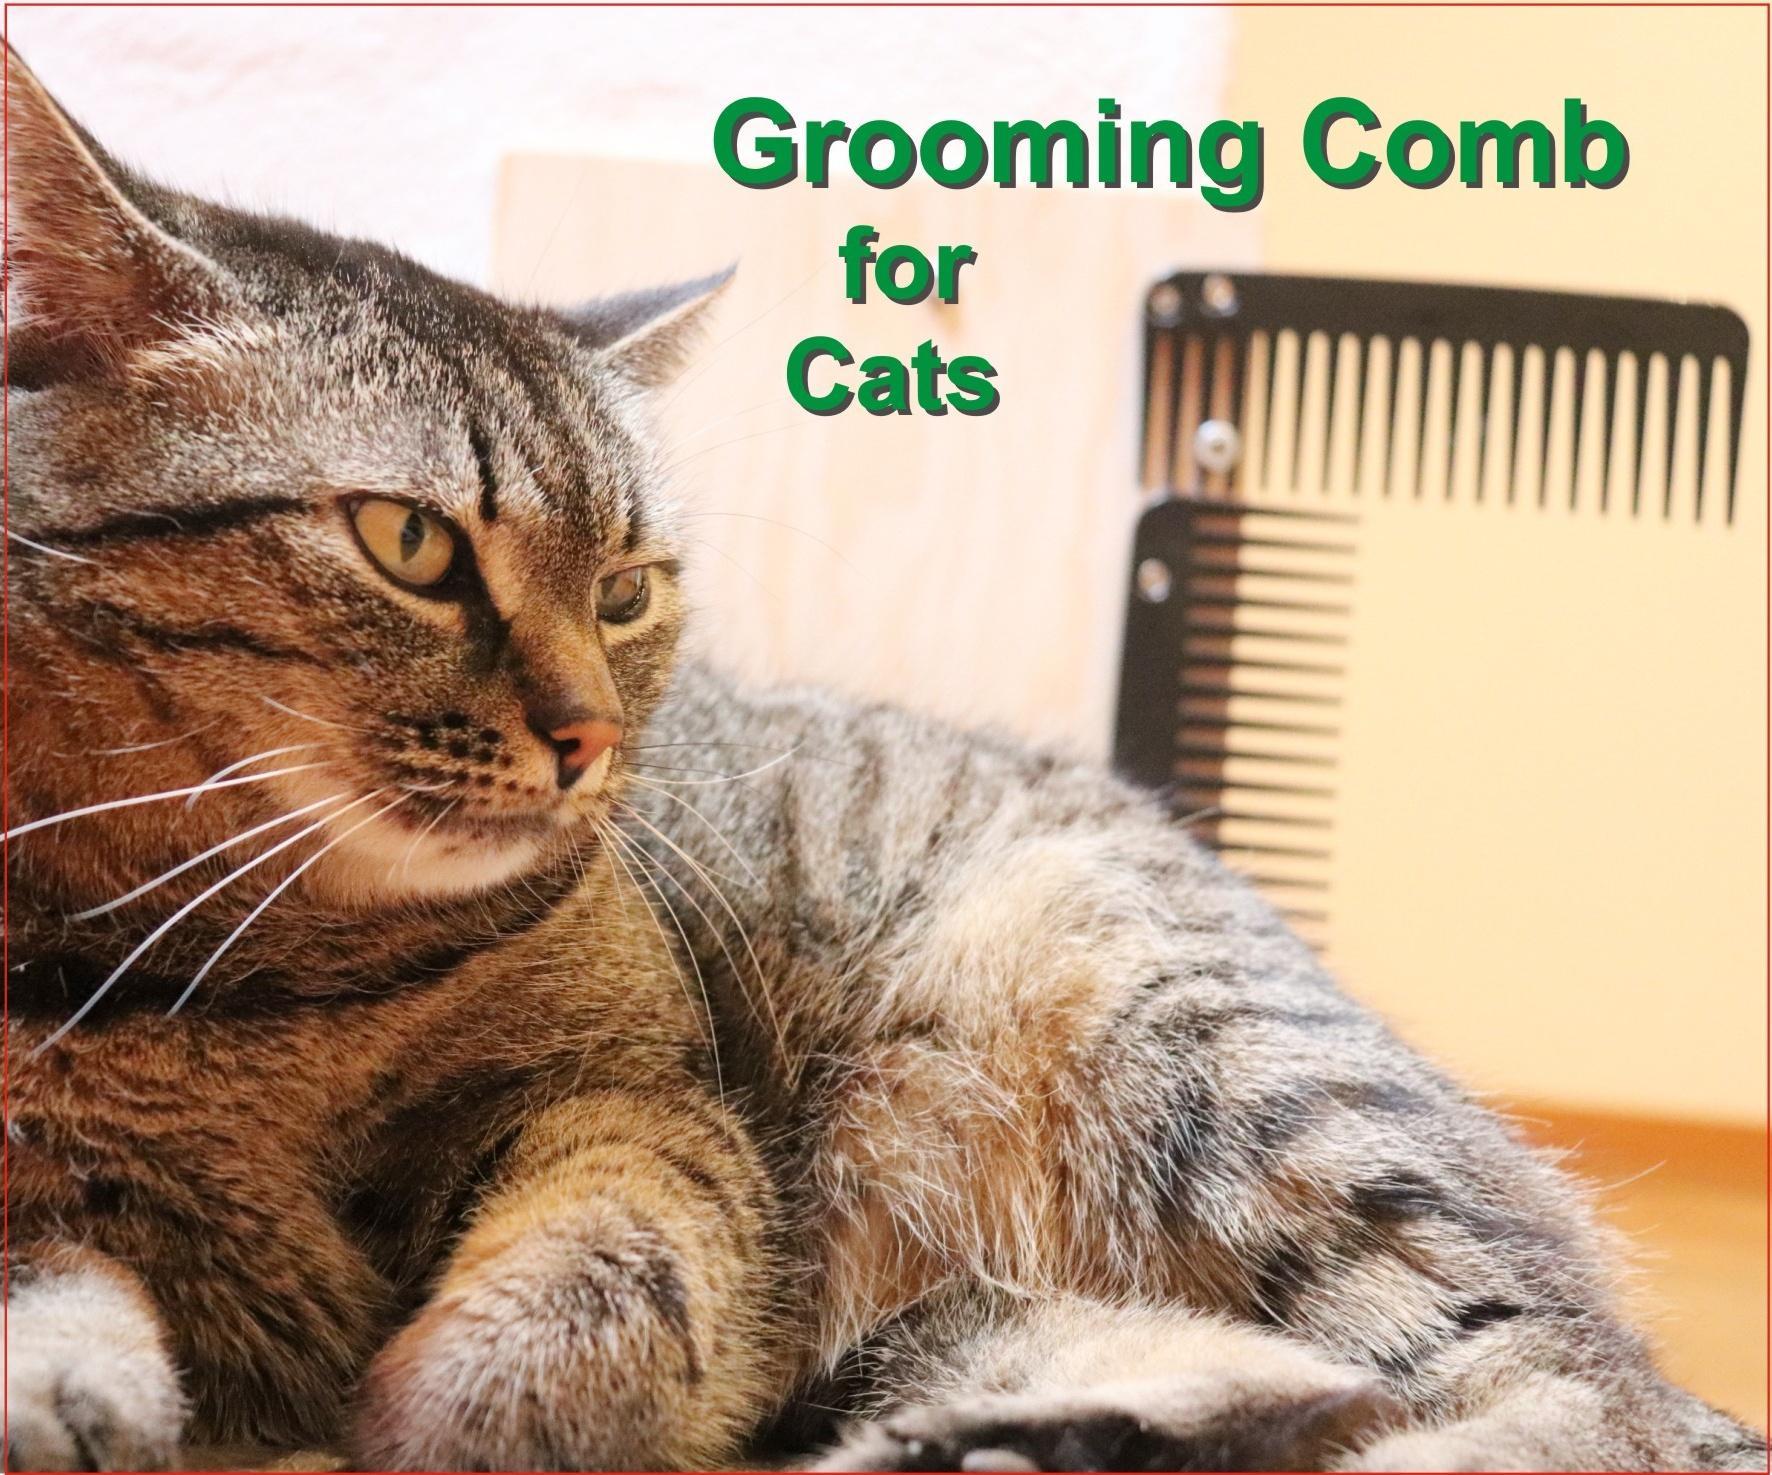 Grooming Comb for Cats